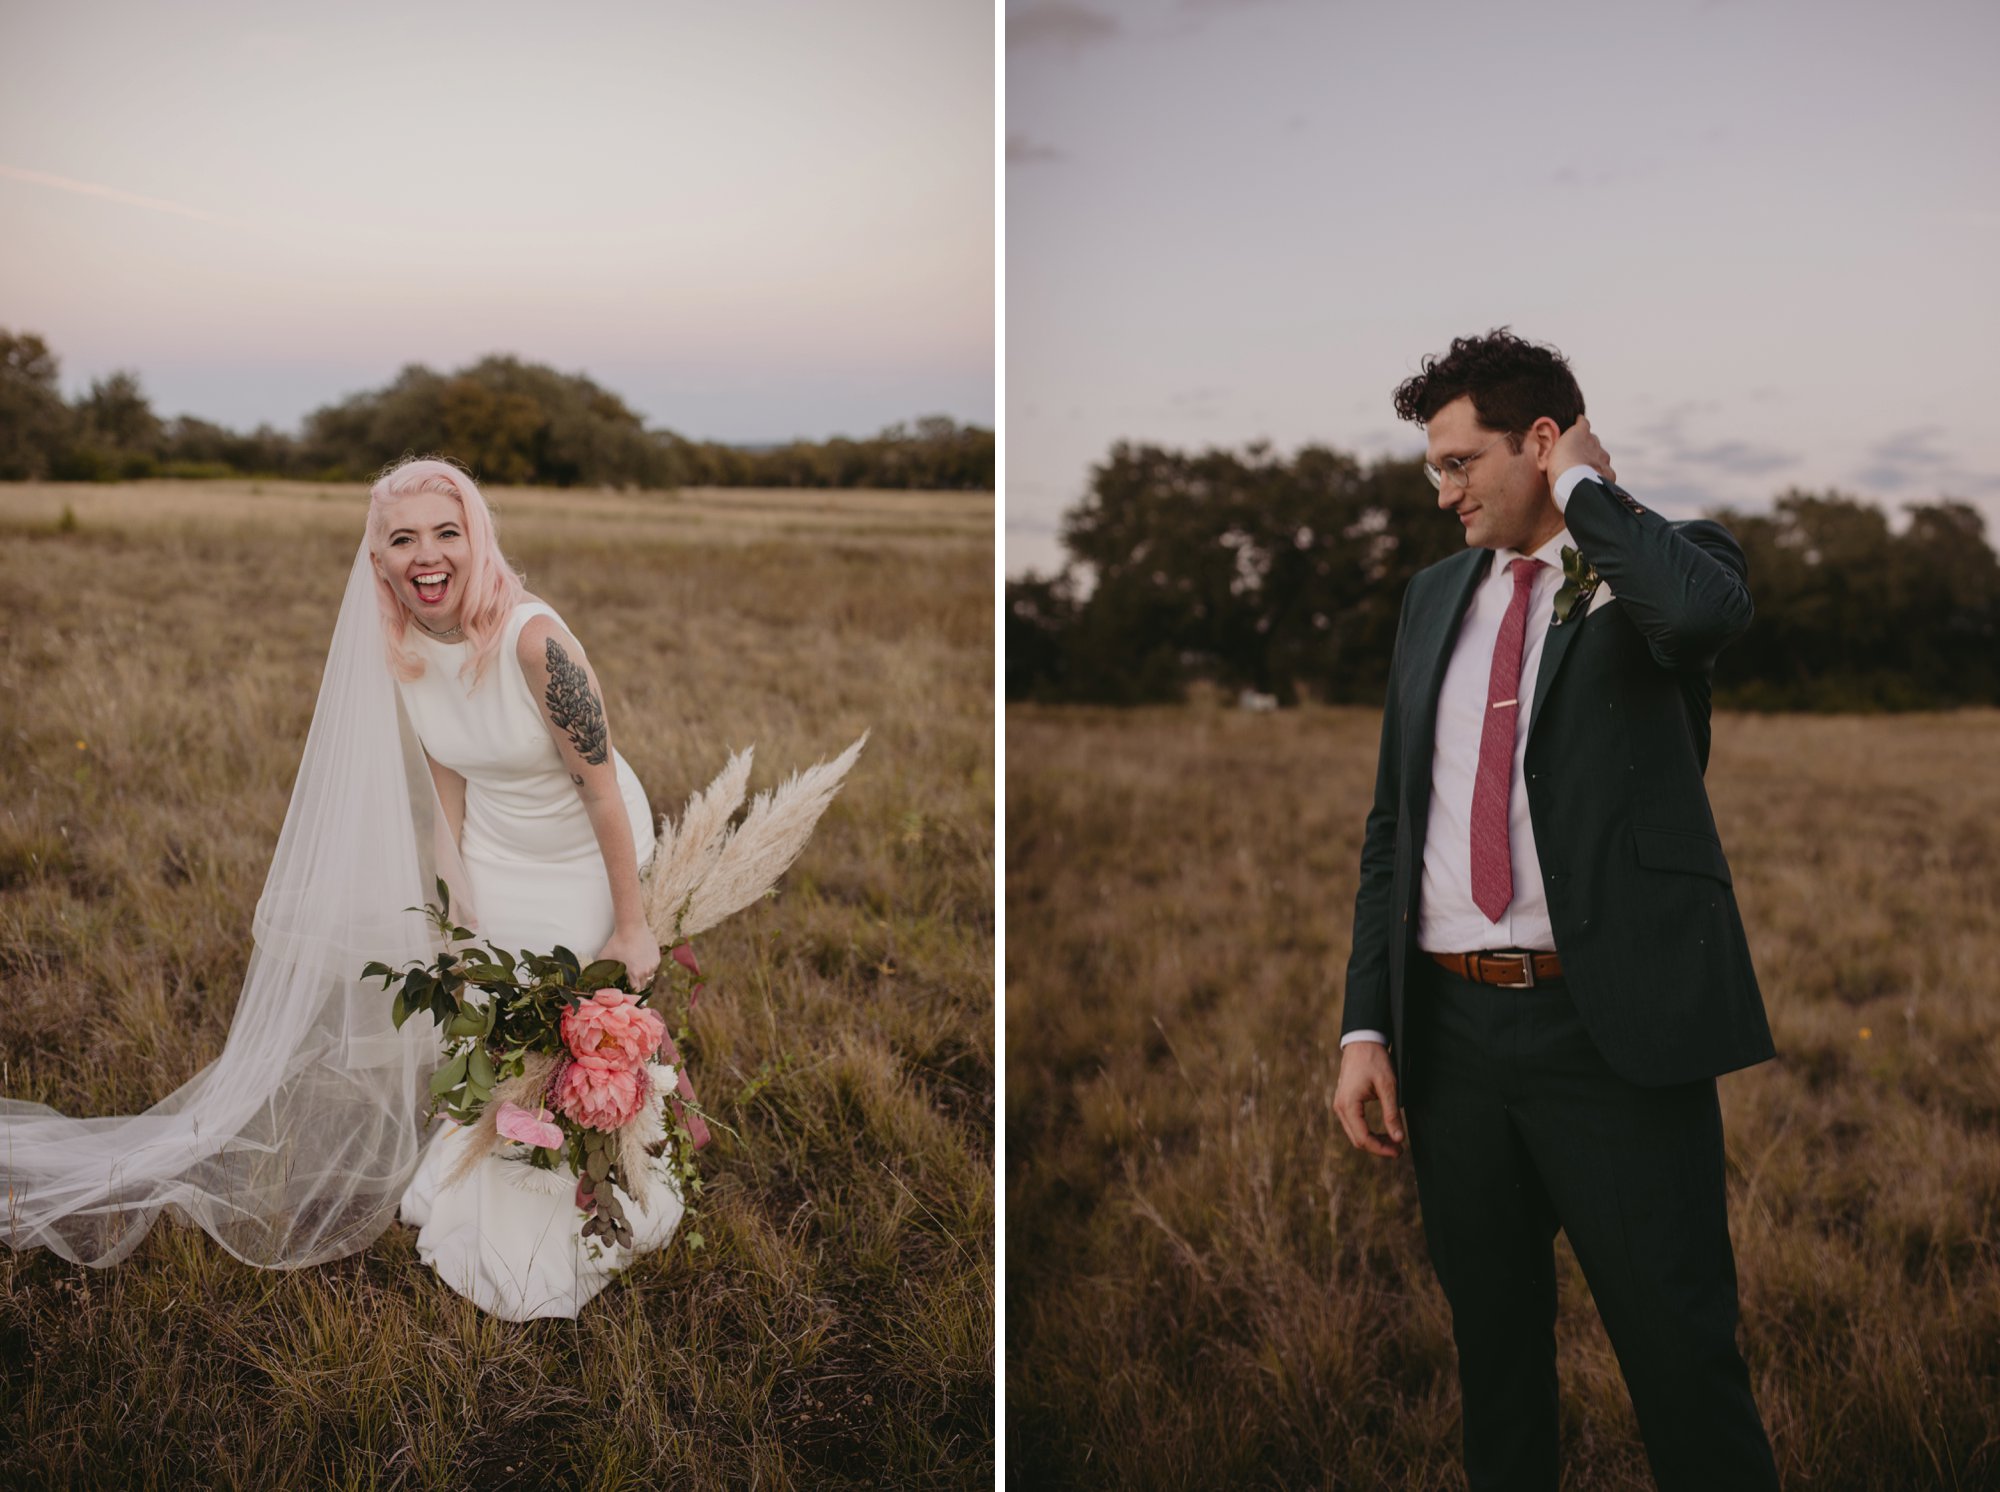 Bride with pink hair and groom in a purple suit prospect house wedding in austin tx with pastel decor and wild florals individual portraits